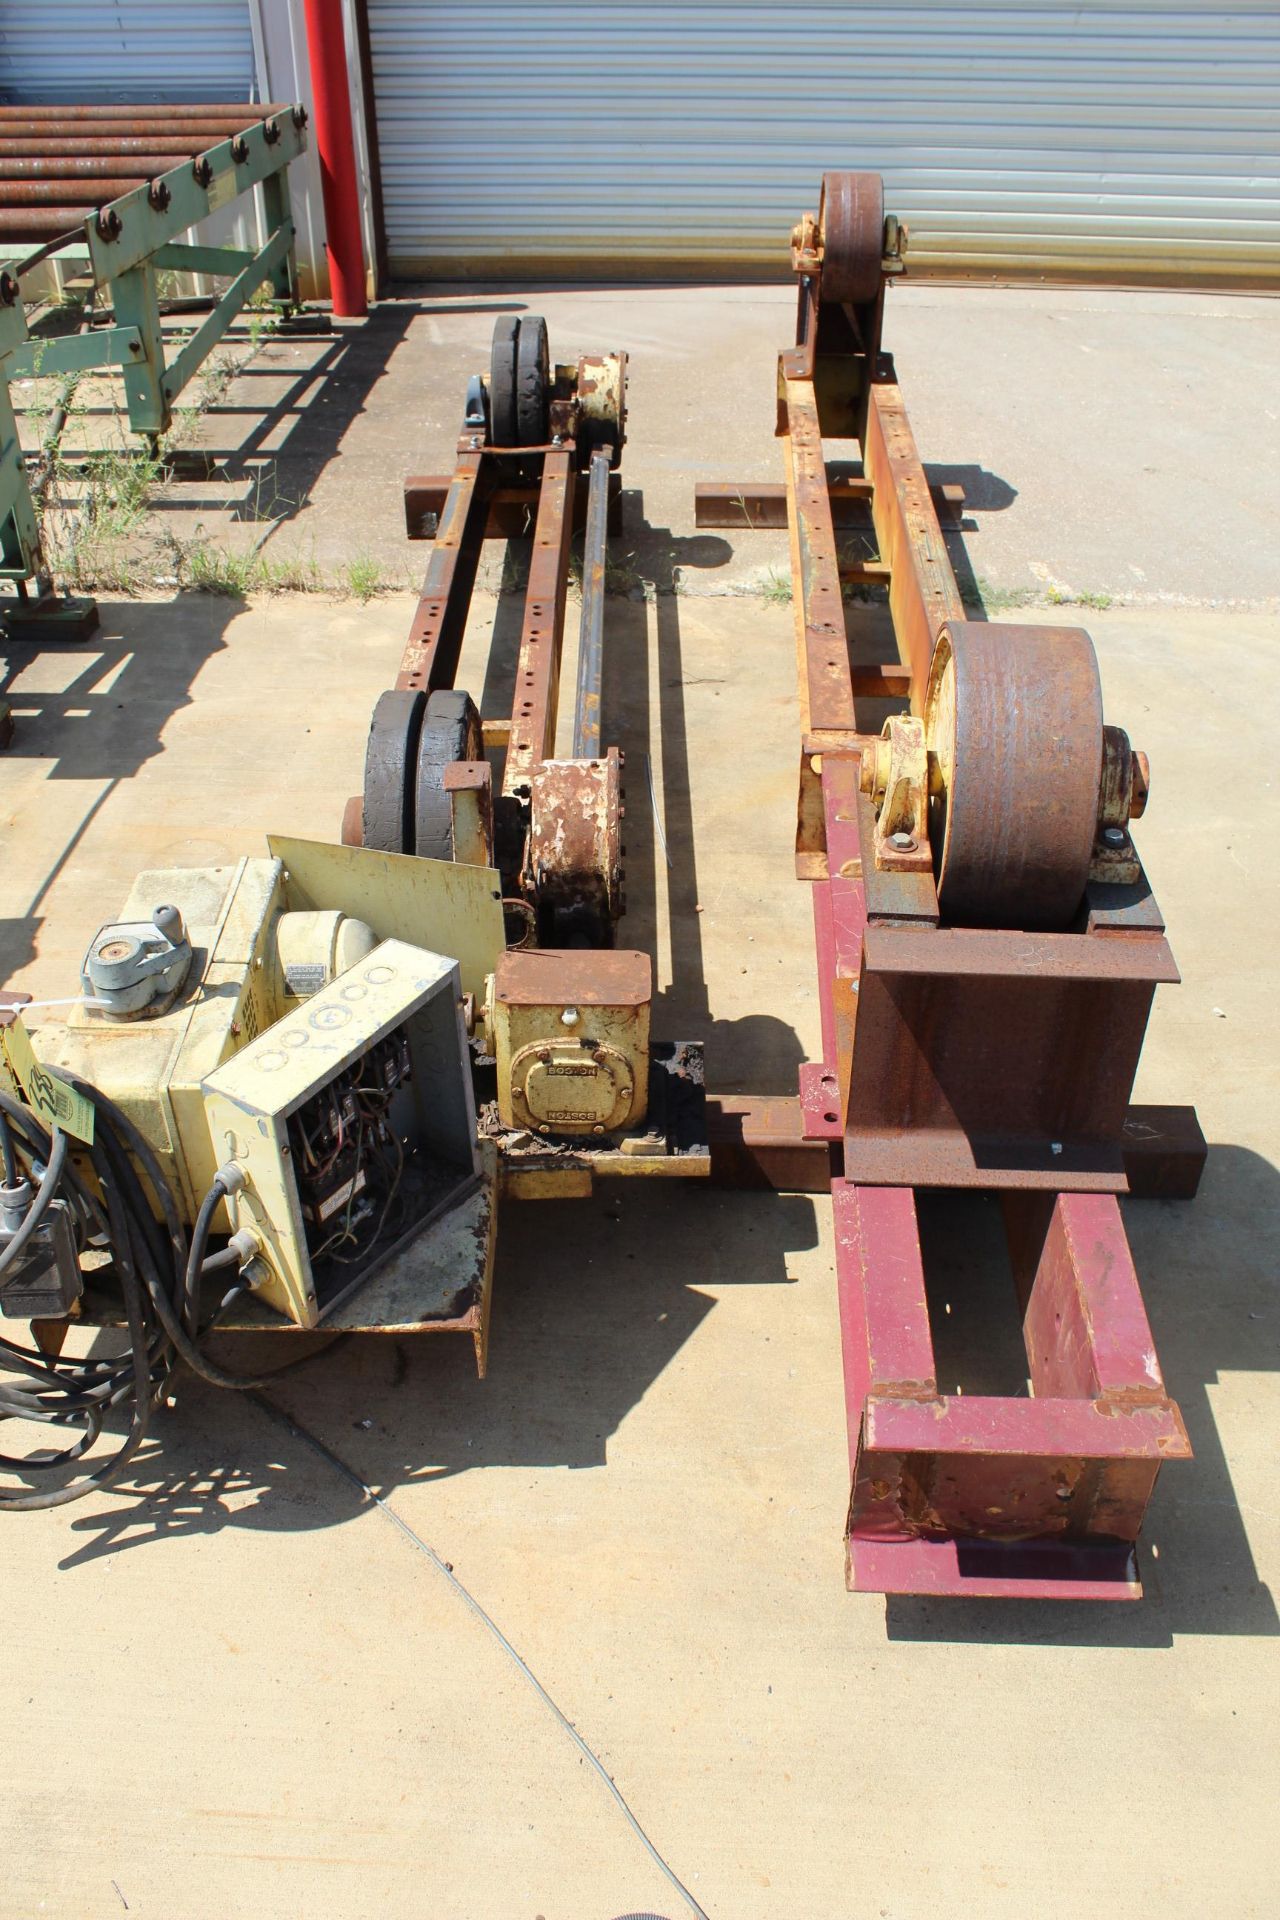 TURNING ROLL SET, 10 T. CAP. DRIVER & IDLER, variable speed drive